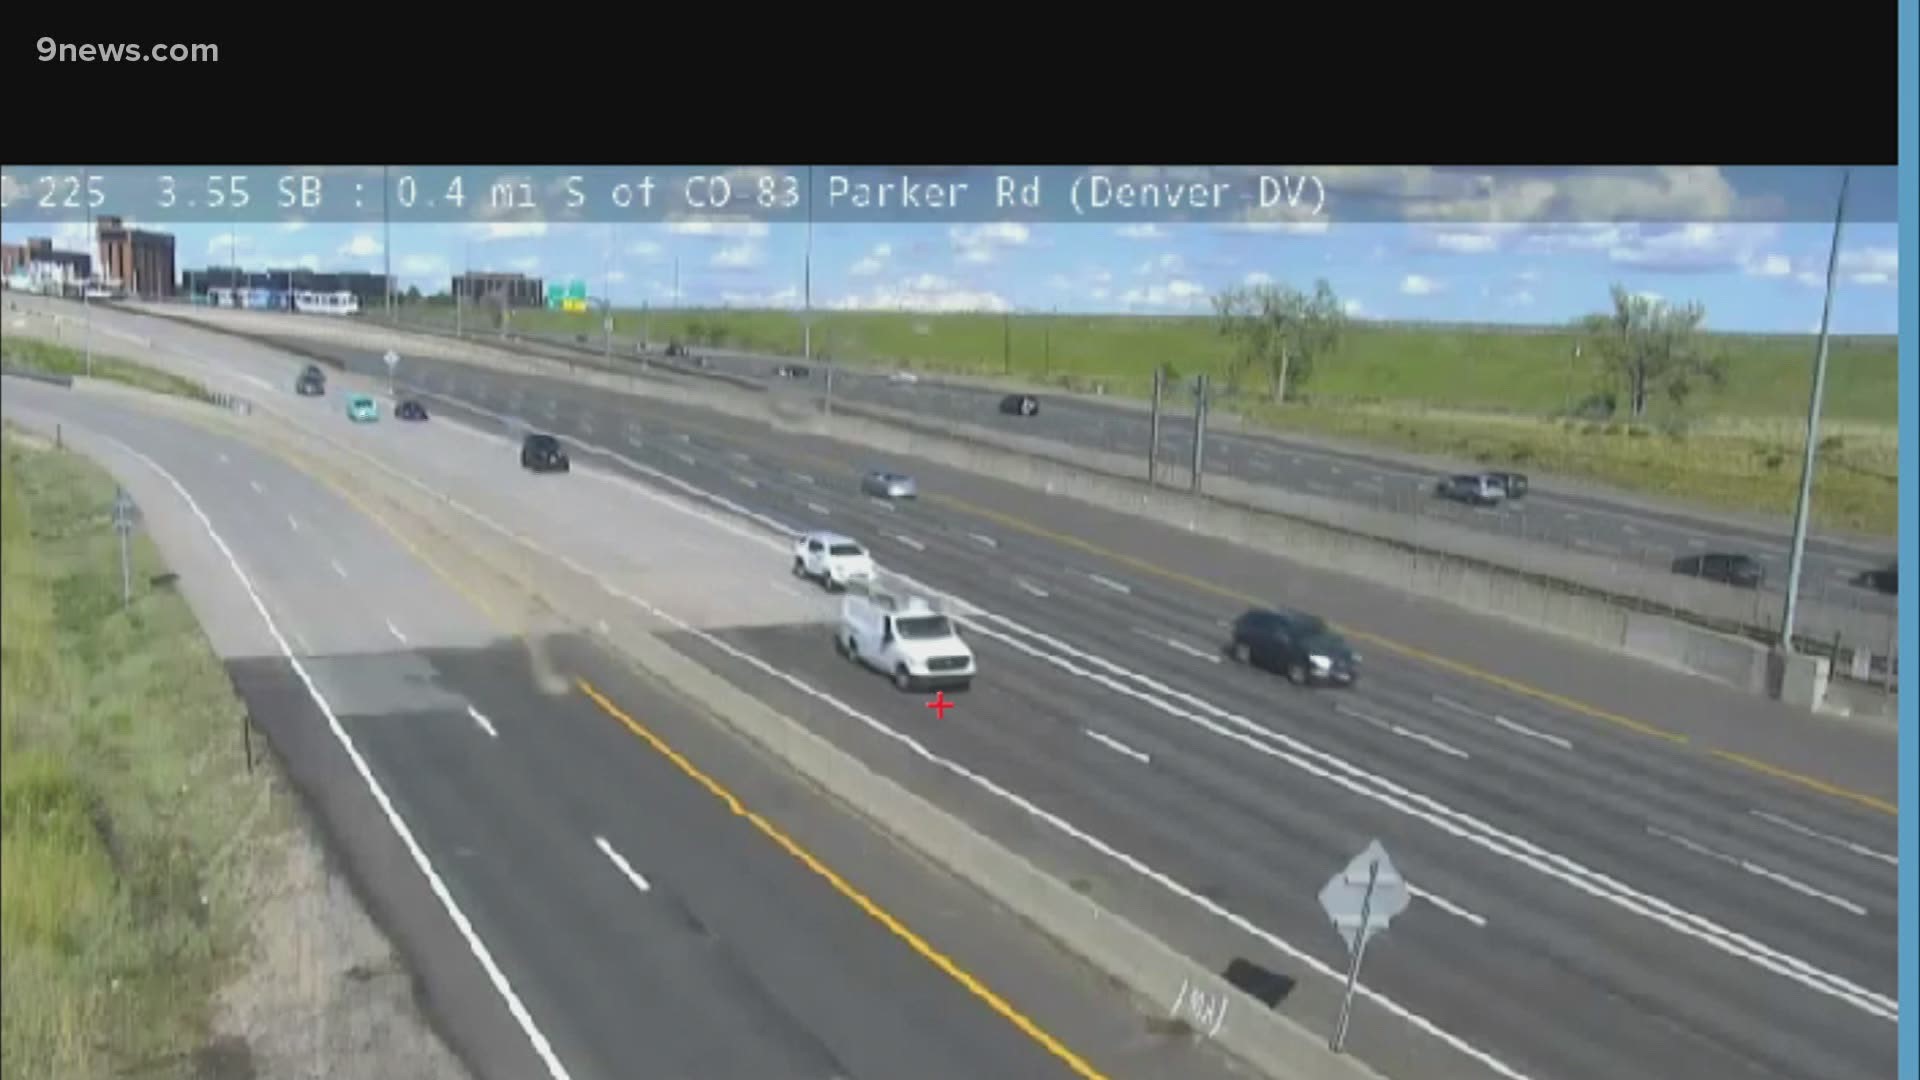 The victim was in the exit lane from southbound Interstate 225 to South Parker Road, according to Aurora Police.